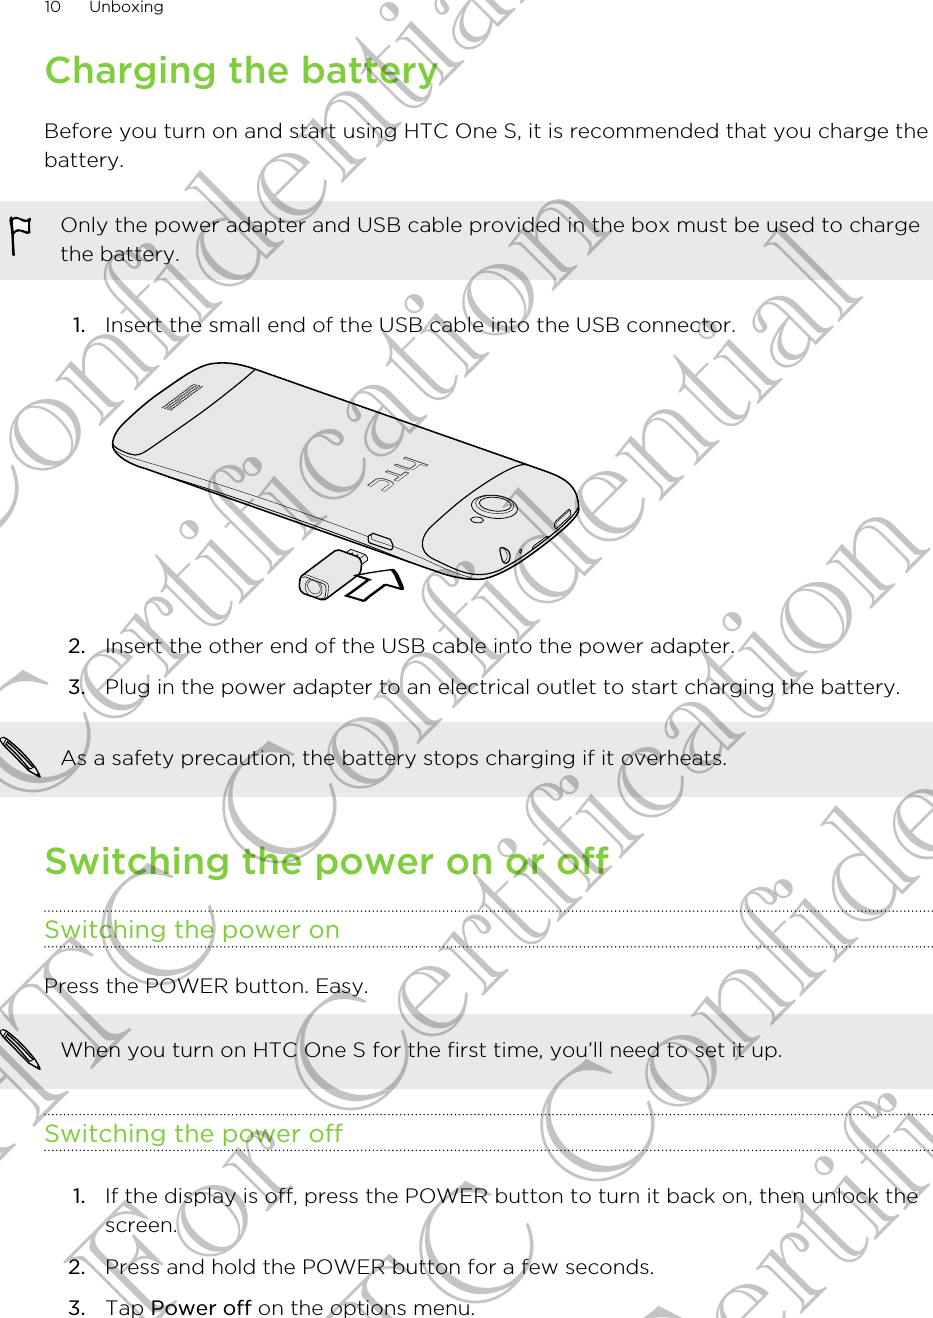 Charging the batteryBefore you turn on and start using HTC One S, it is recommended that you charge thebattery.Only the power adapter and USB cable provided in the box must be used to chargethe battery.1. Insert the small end of the USB cable into the USB connector. 2. Insert the other end of the USB cable into the power adapter.3. Plug in the power adapter to an electrical outlet to start charging the battery.As a safety precaution, the battery stops charging if it overheats.Switching the power on or offSwitching the power onPress the POWER button. Easy. When you turn on HTC One S for the first time, you’ll need to set it up.Switching the power off1. If the display is off, press the POWER button to turn it back on, then unlock thescreen.2. Press and hold the POWER button for a few seconds.3. Tap Power off on the options menu.10 UnboxingHTC Confidential For Certification HTC Confidential For Certification HTC Confidential For Certification